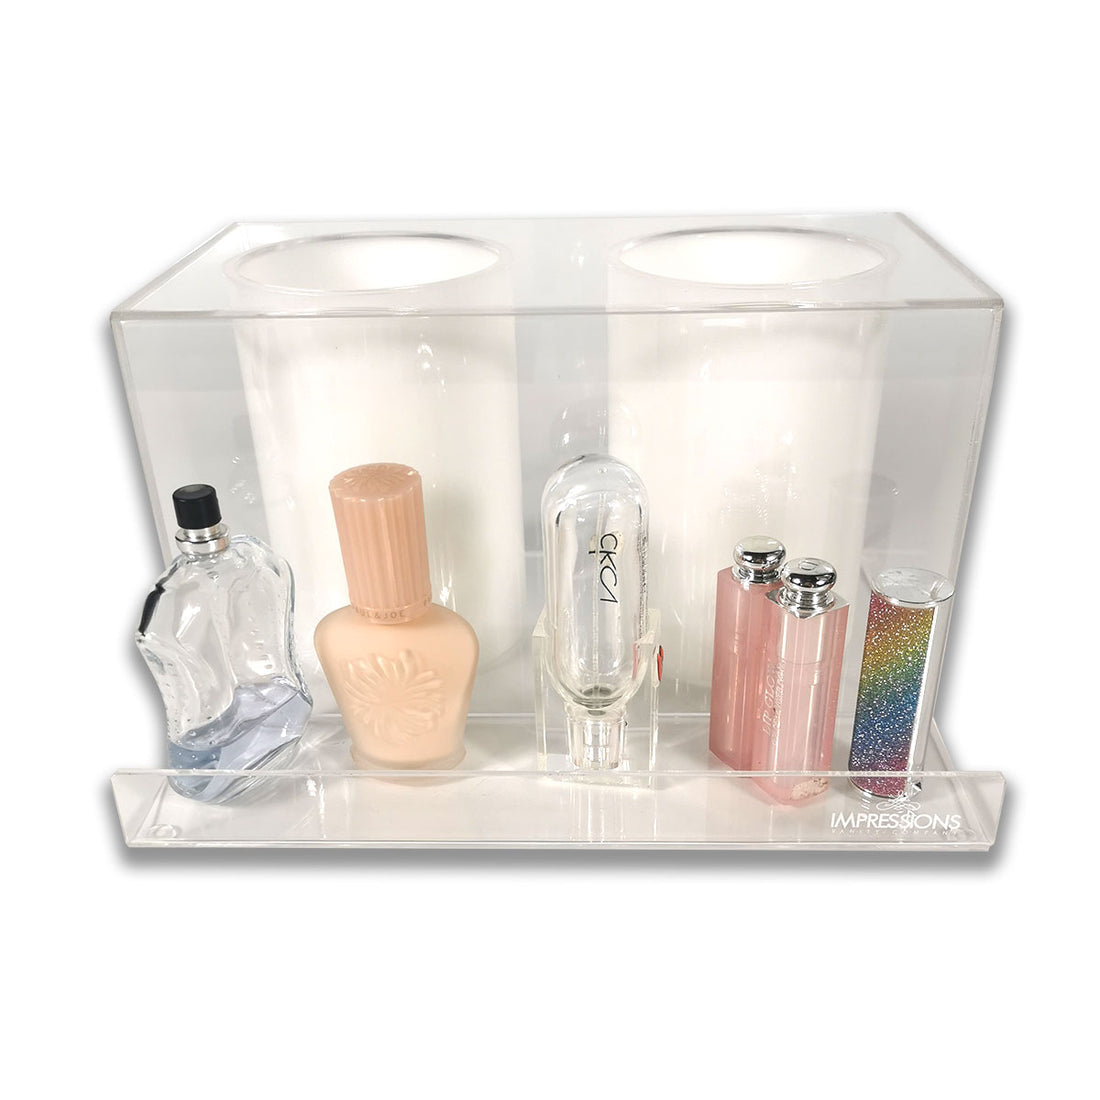 Impressions Vanity Hair Caddy Acrylic Organizer, Display Case for All Hair Care Products, Heavy Duty Vanity Organizers for Brushes and Skin Product